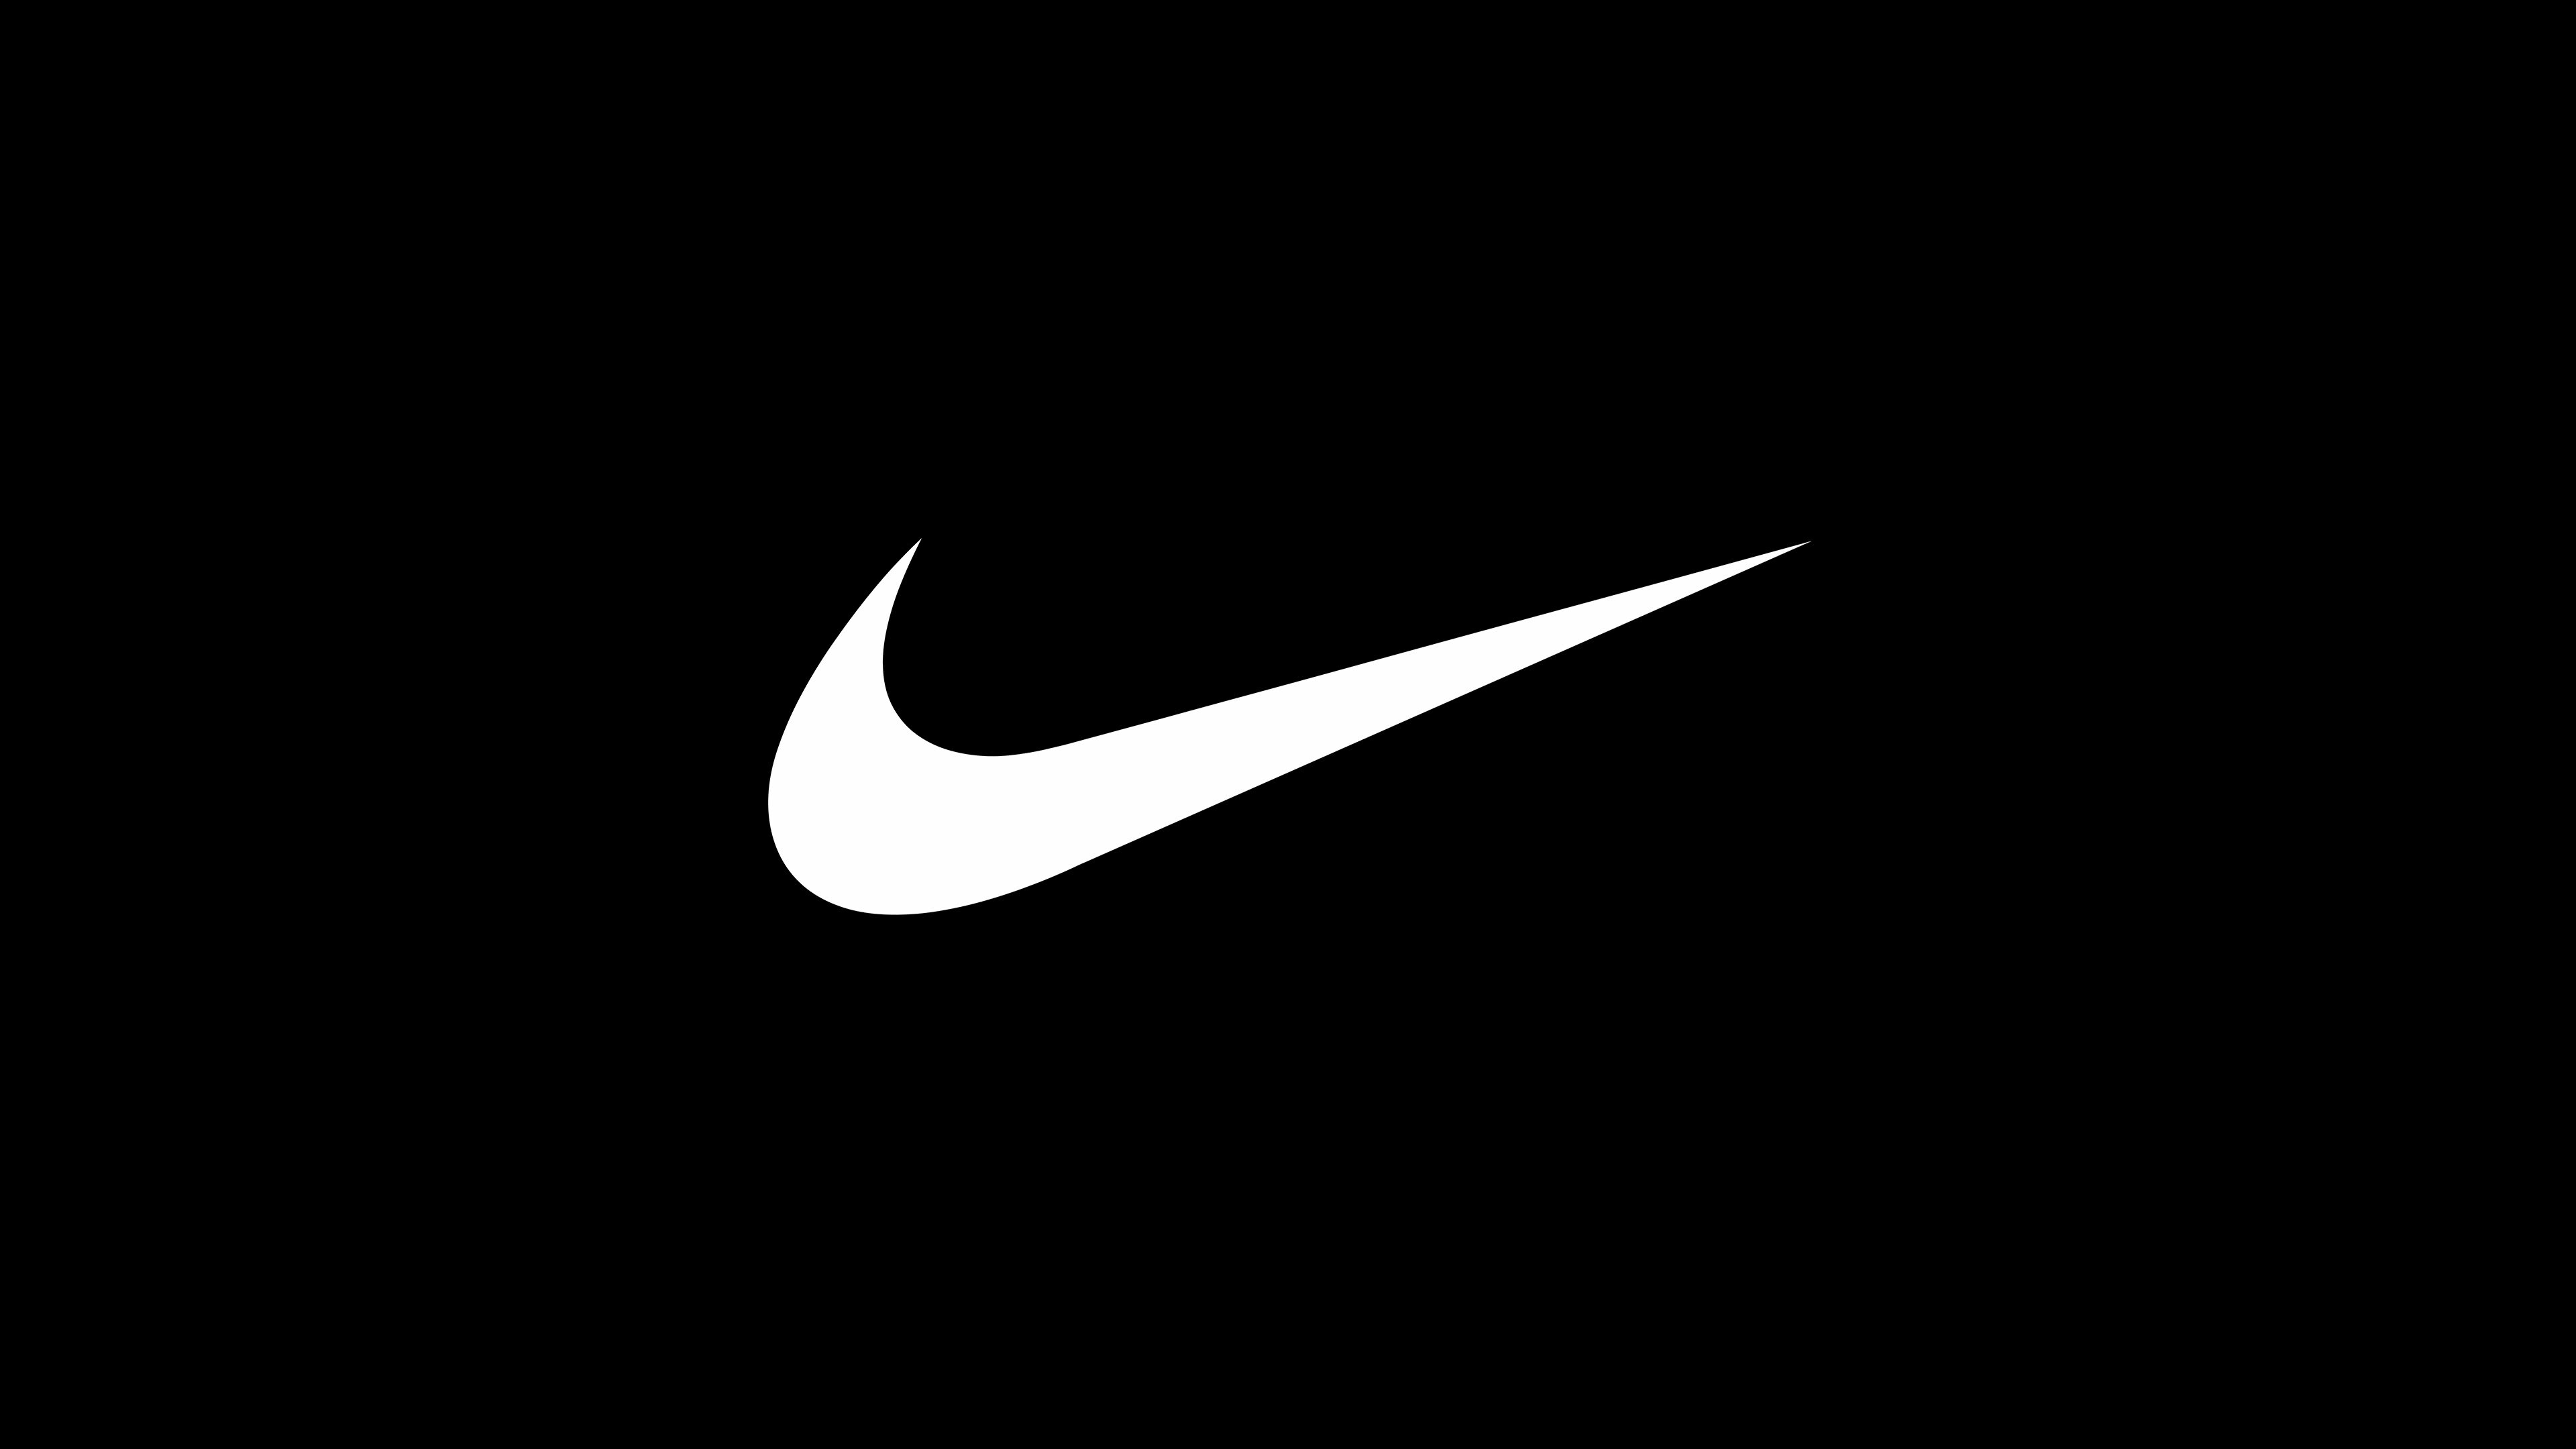 Nike: Swoosh, One of the most recognizable brand logos in the world. 3840x2160 4K Background.